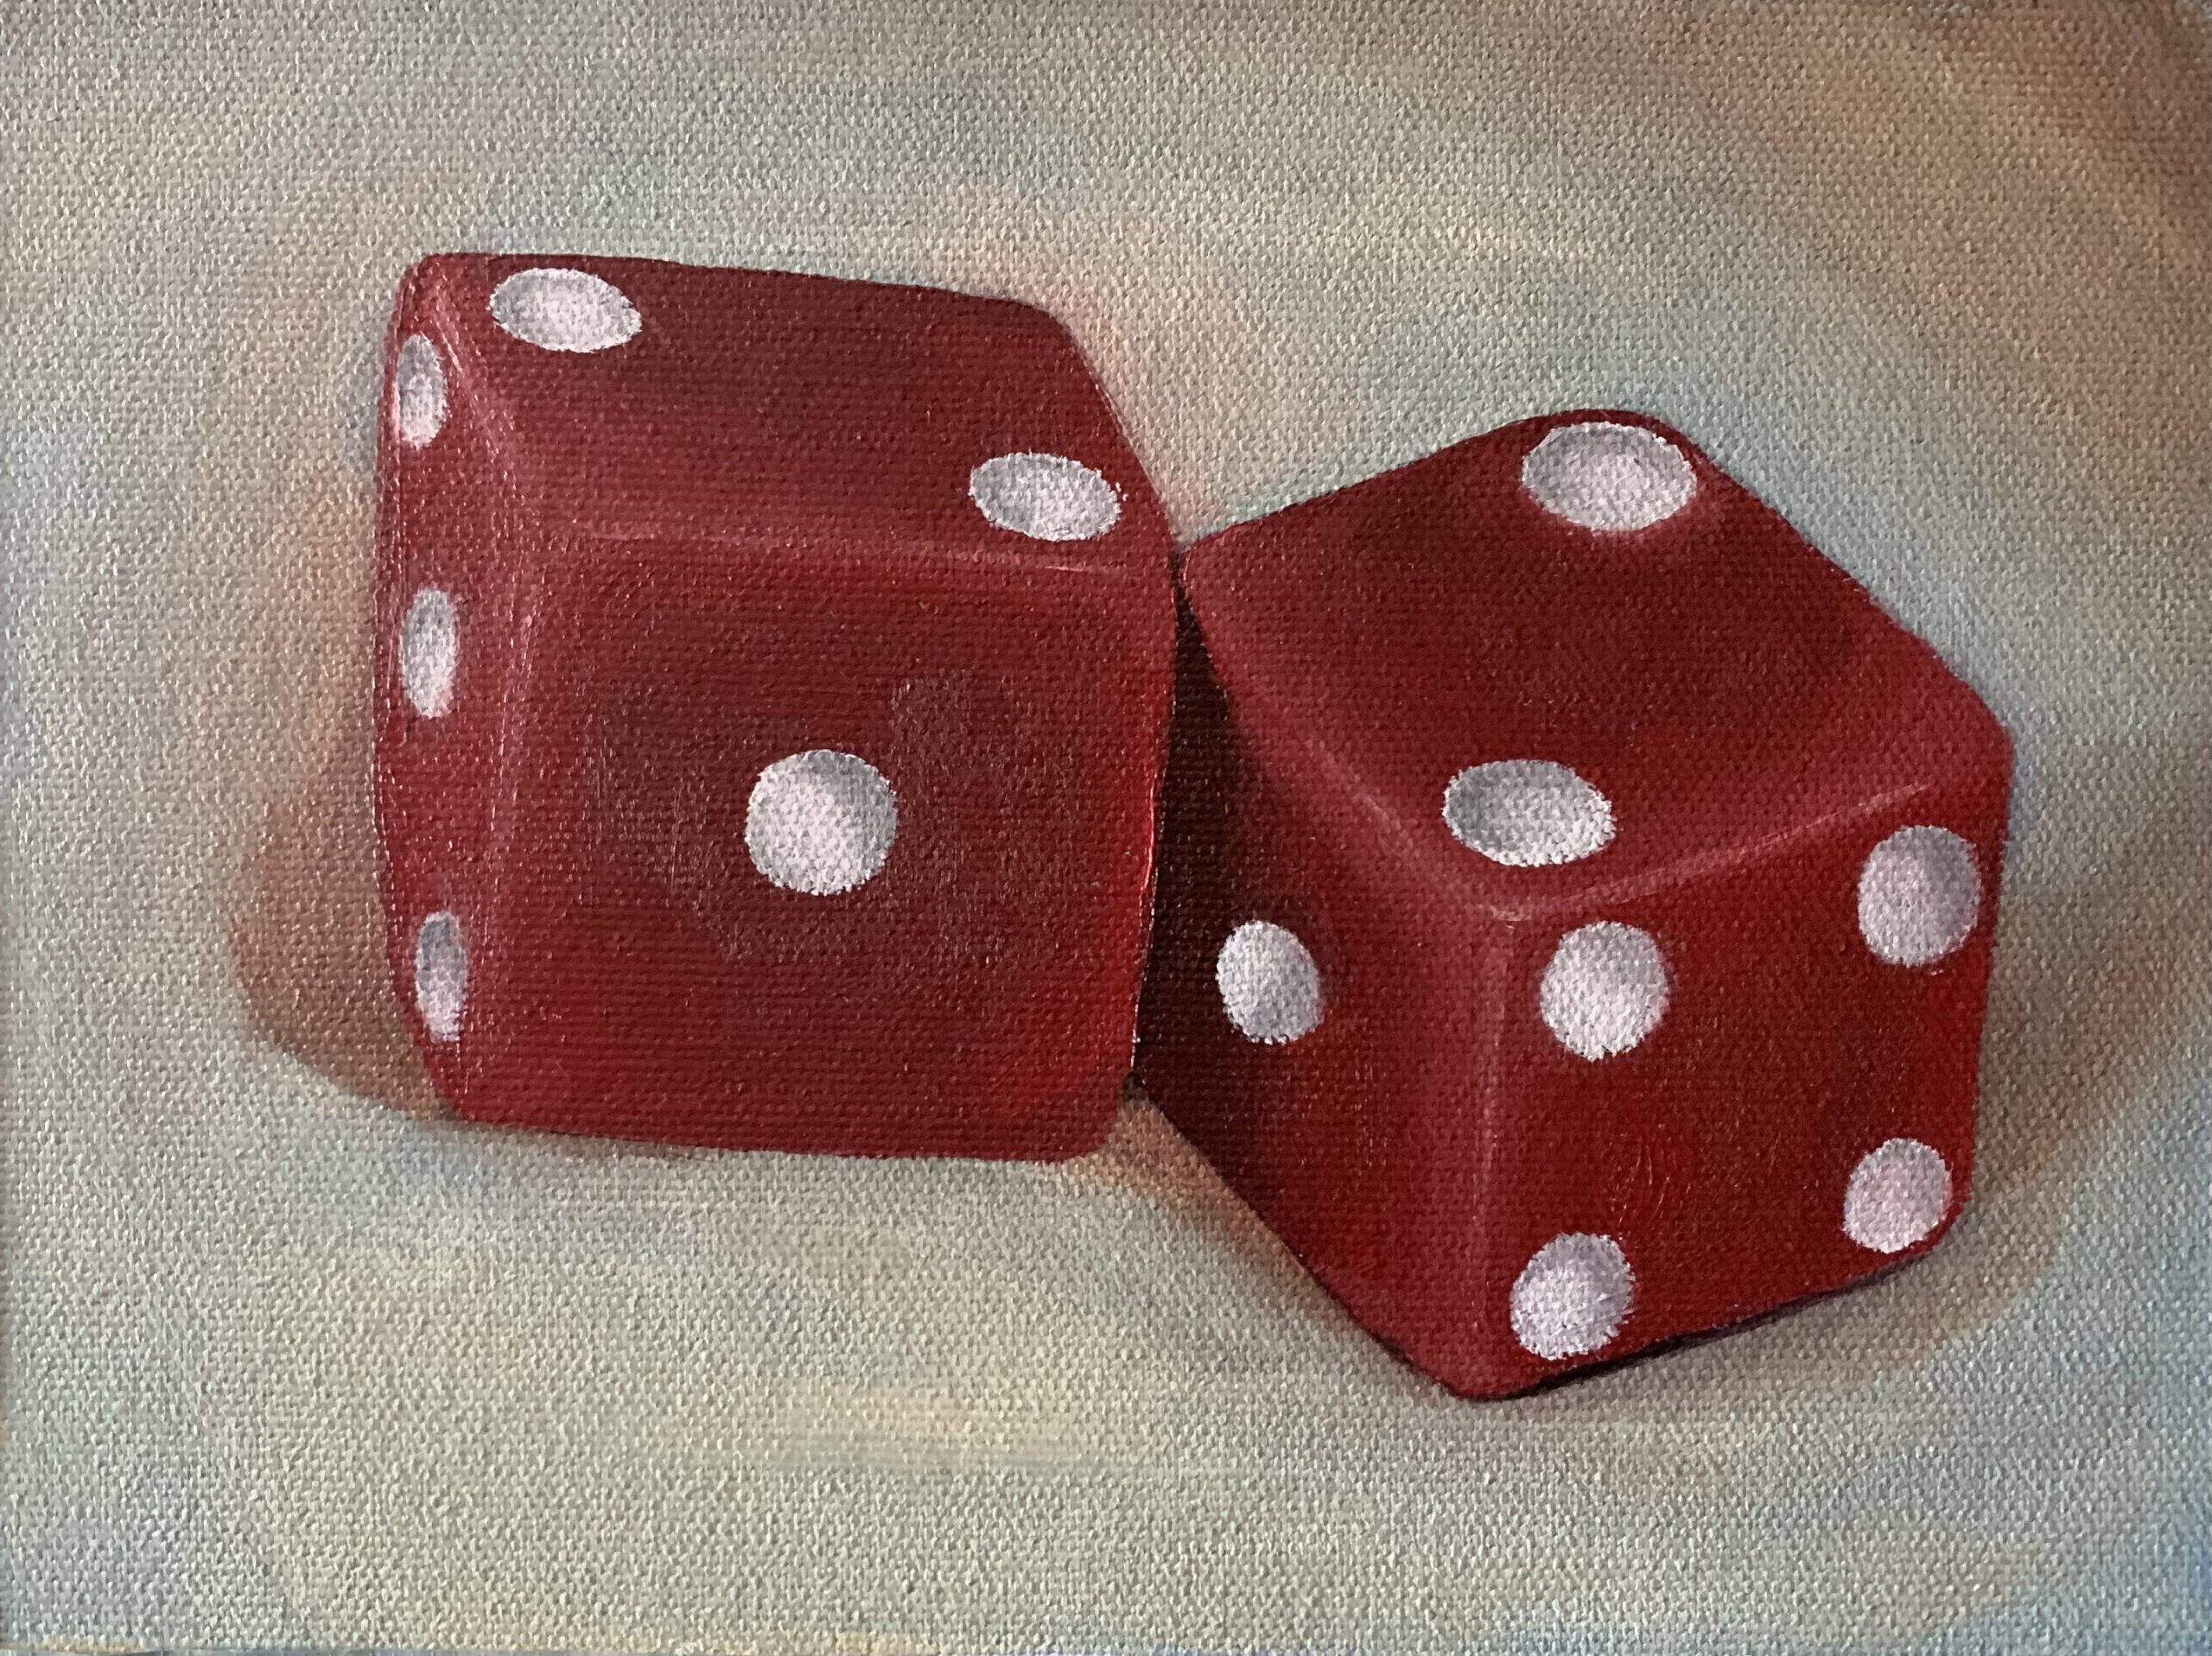 still life oil painting of 2 red dice